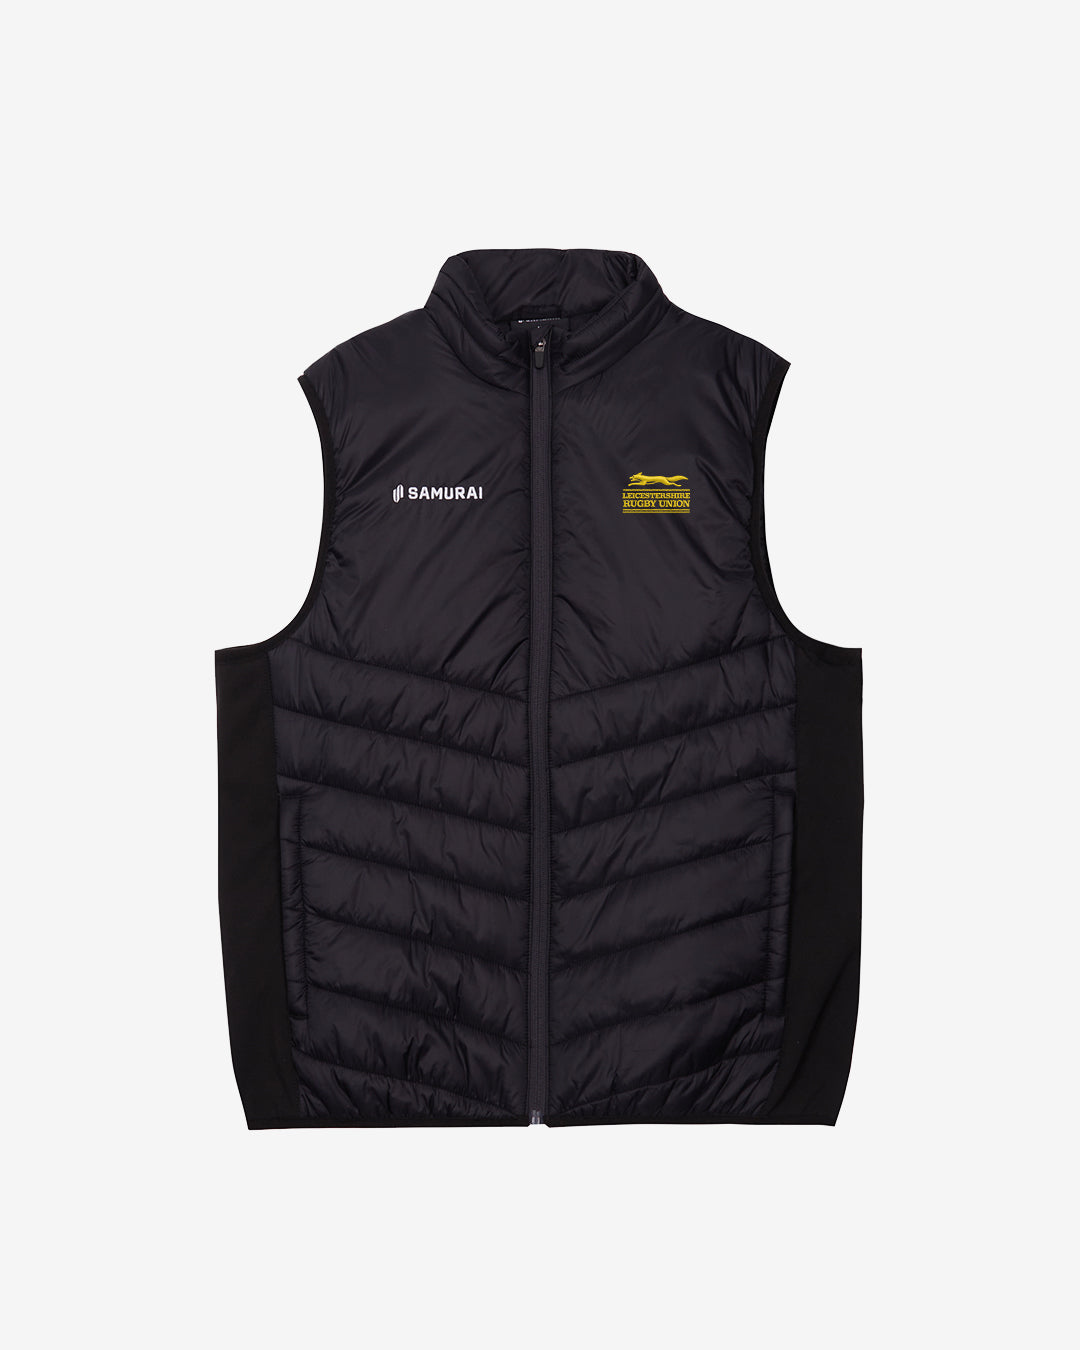 Leicestershire Rugby Union - U:0204 - Gilet - Black